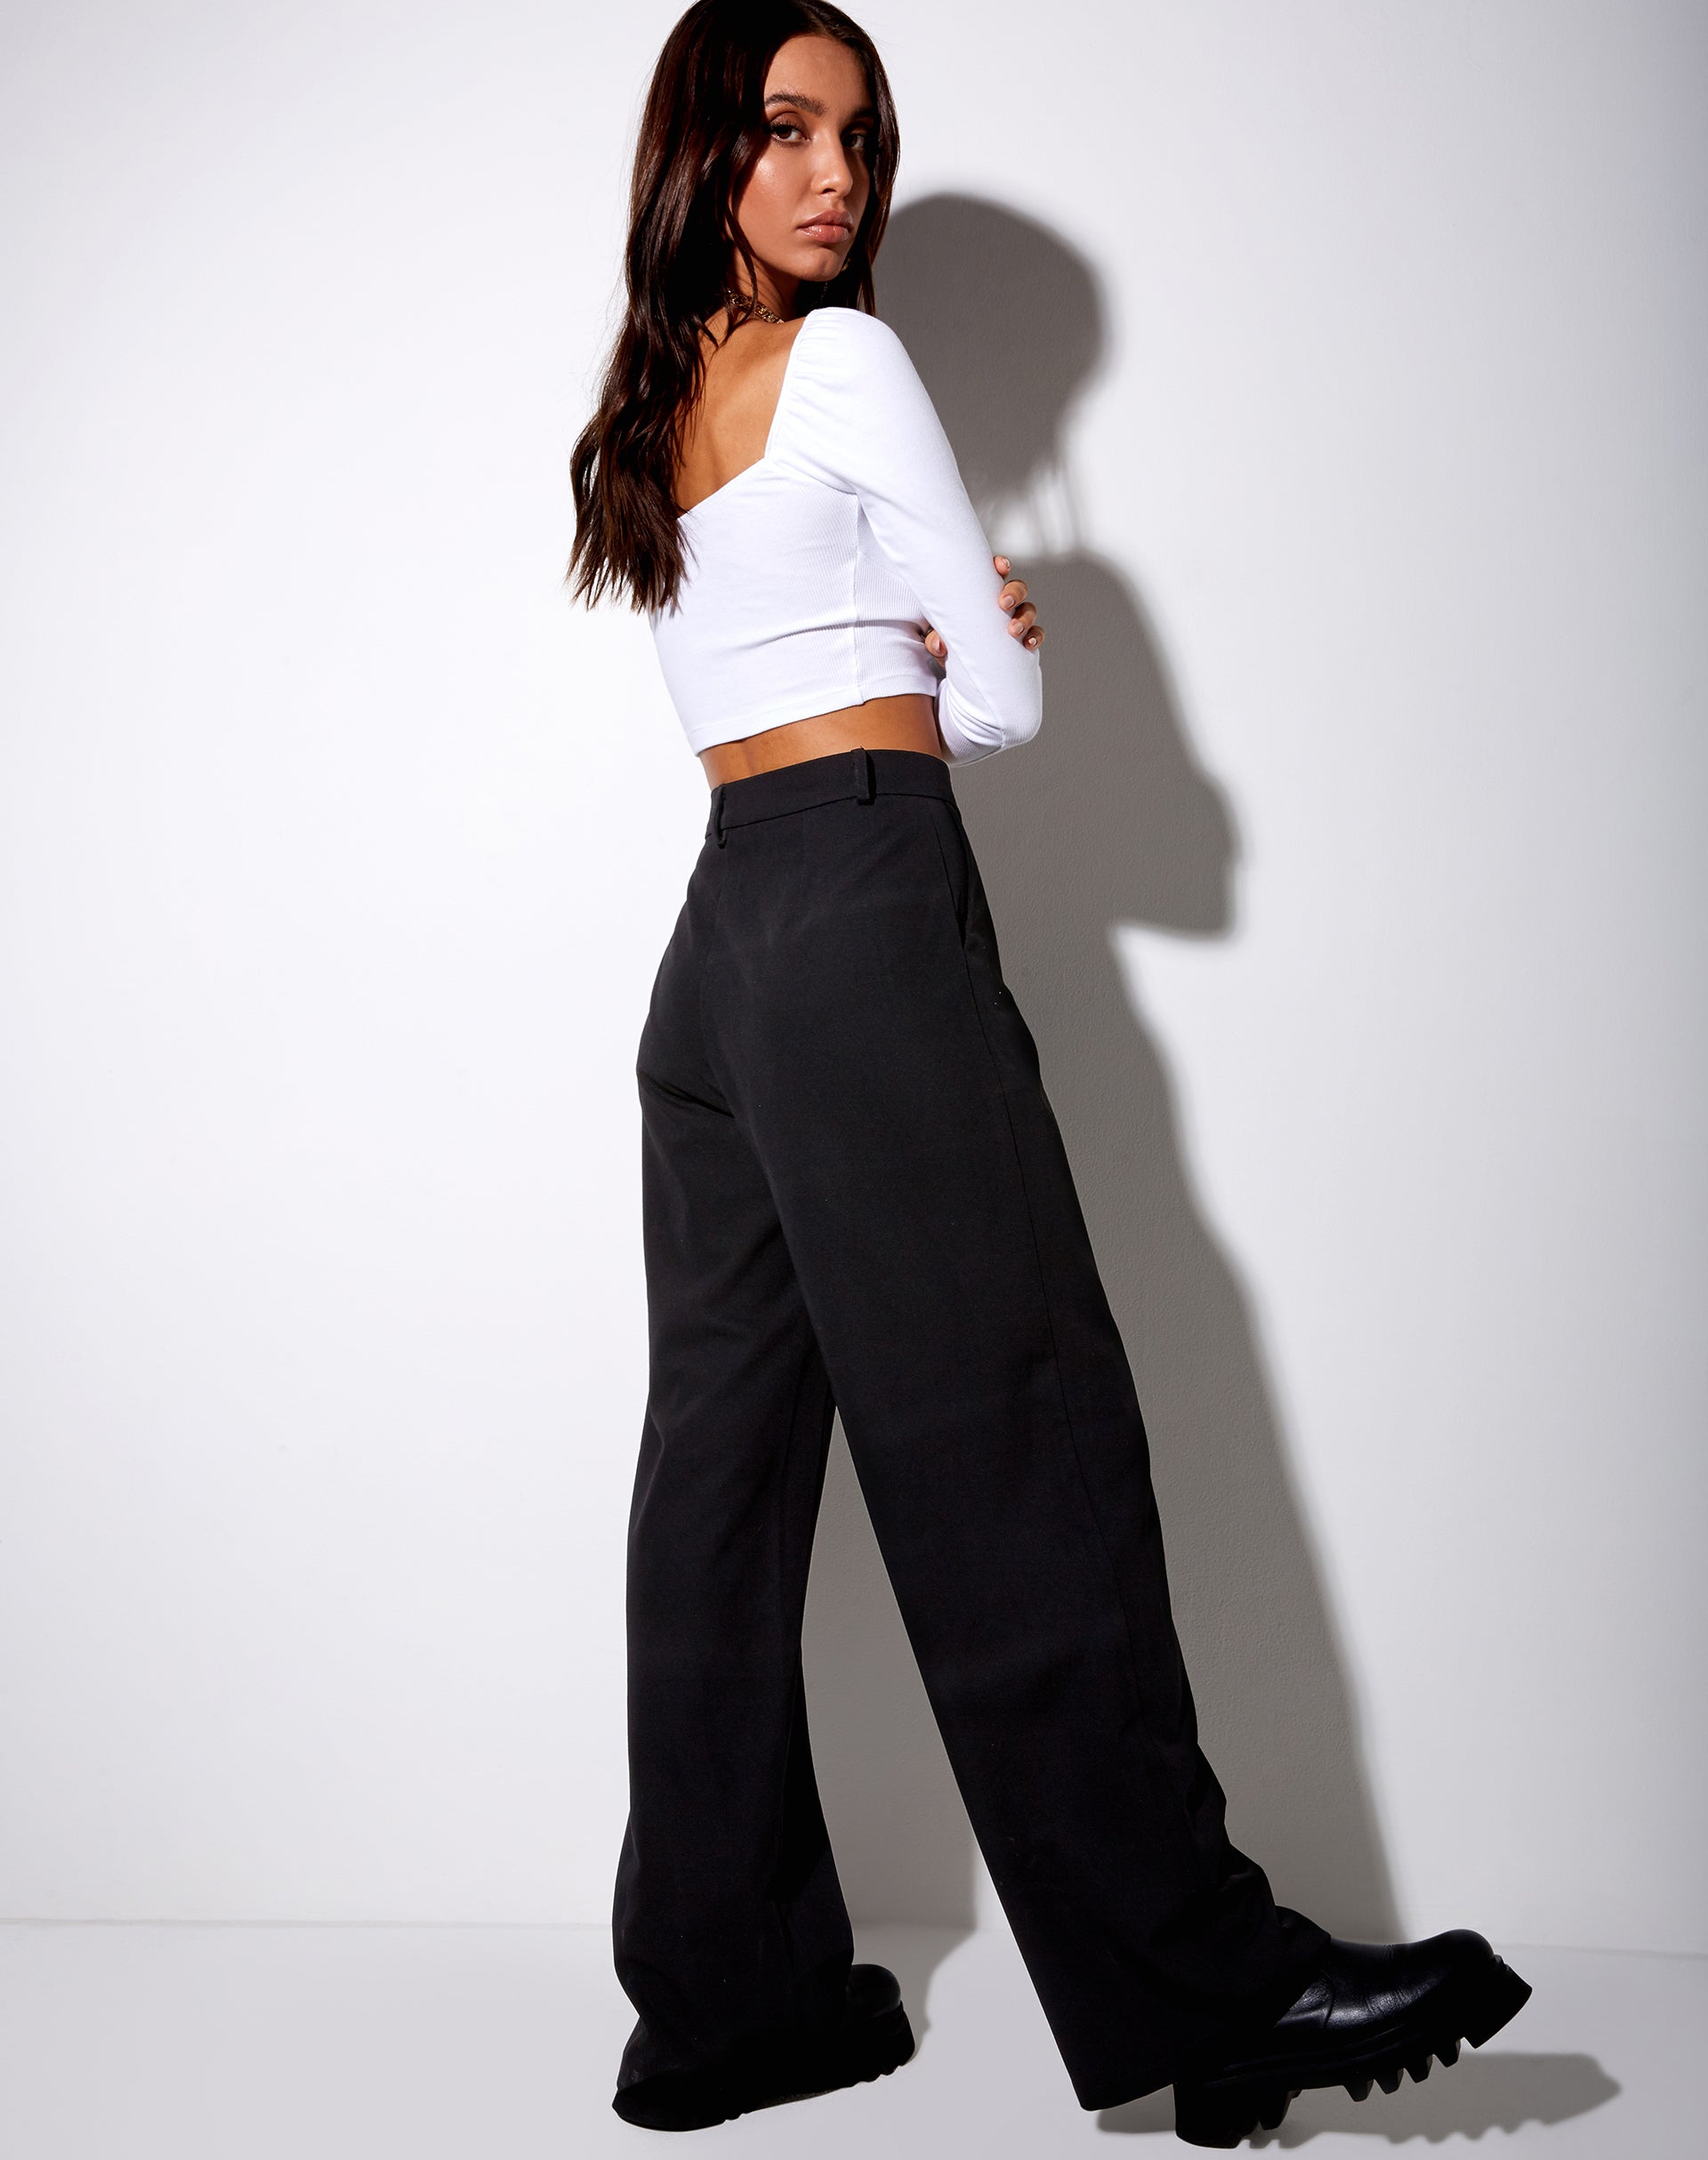 Image of Inalo Crop Top in Rib White